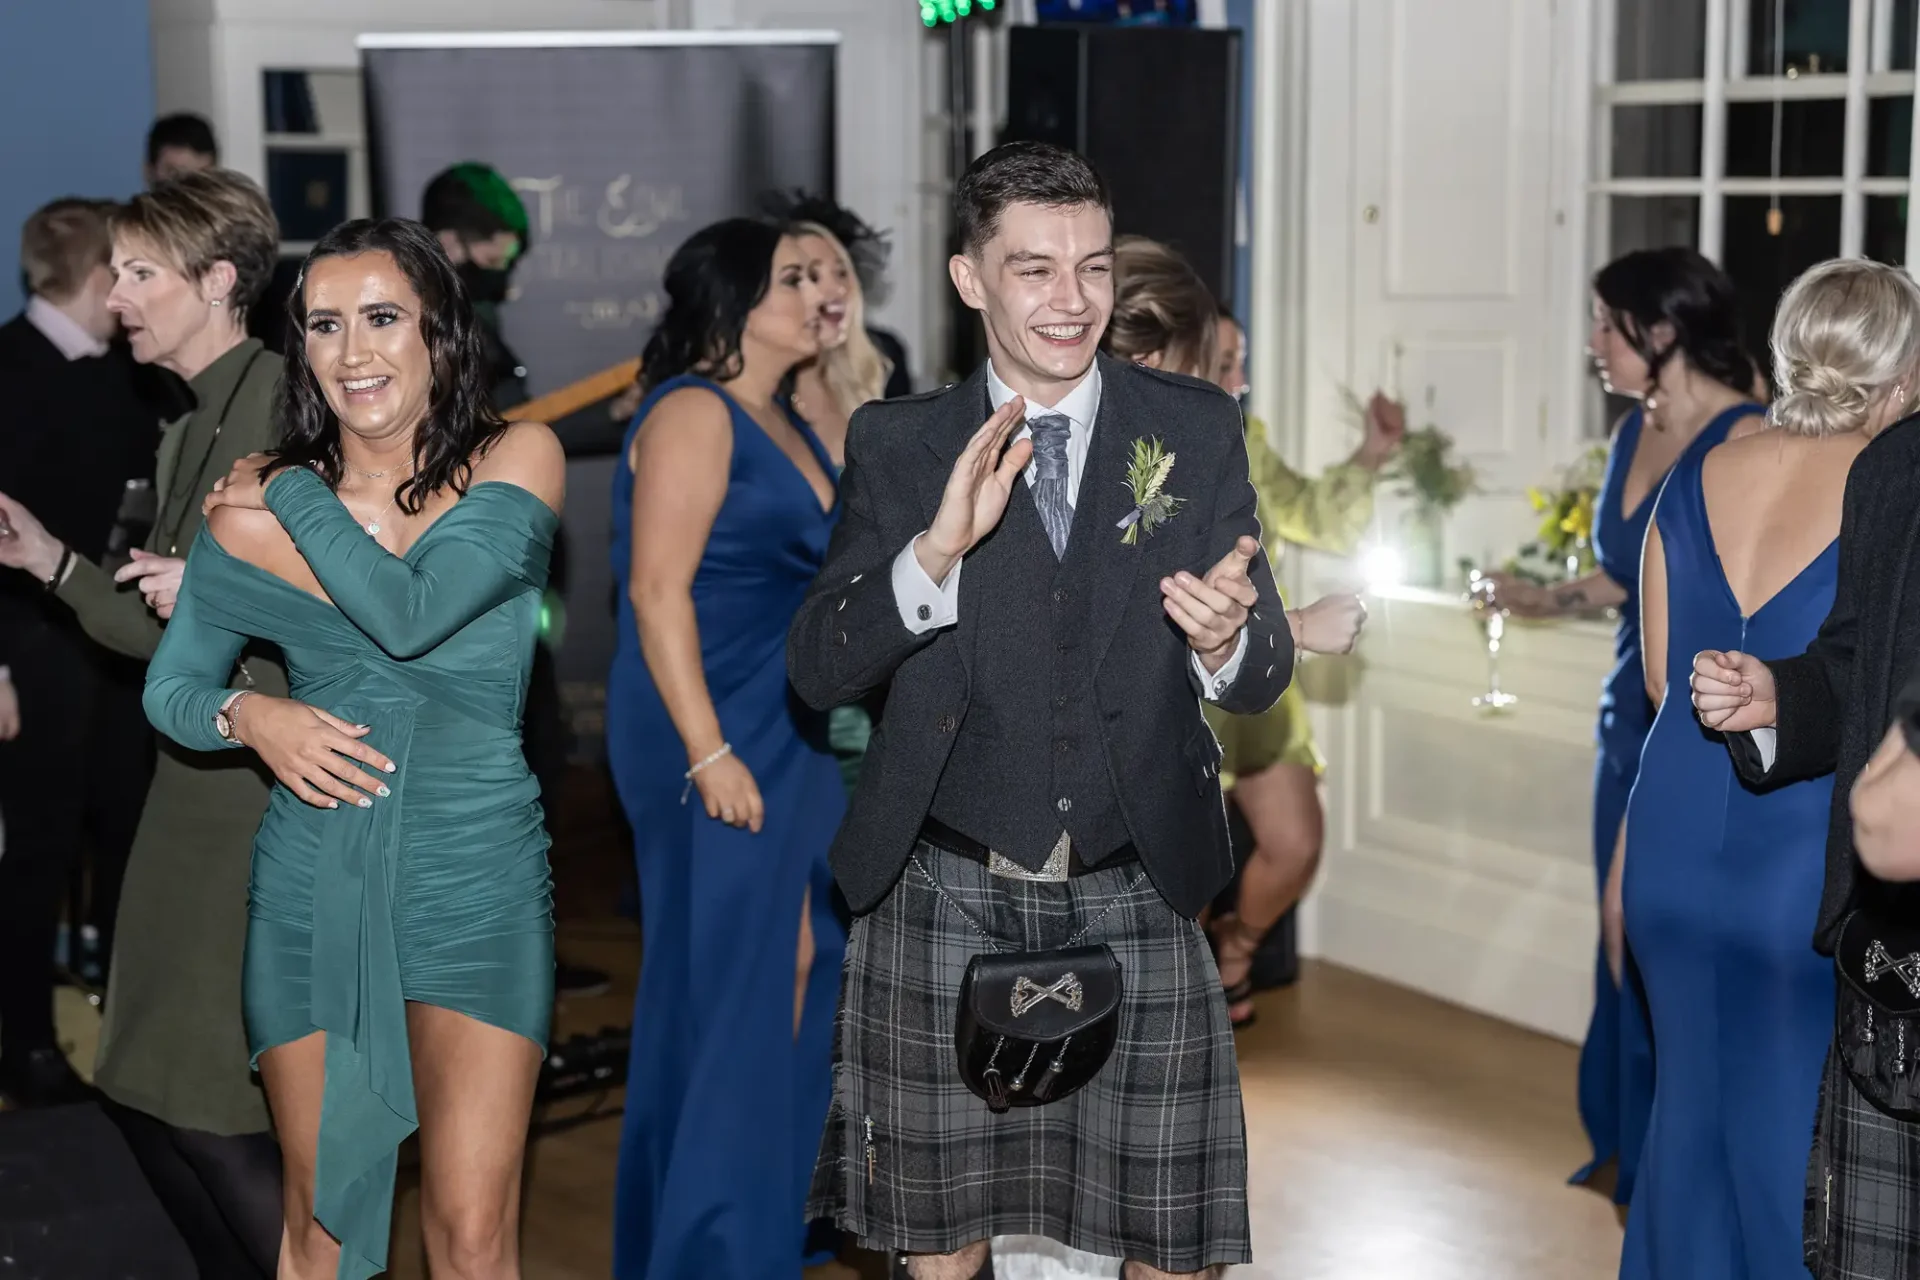 A young man in a kilt smiling as he dances at a lively event, surrounded by elegantly dressed guests.